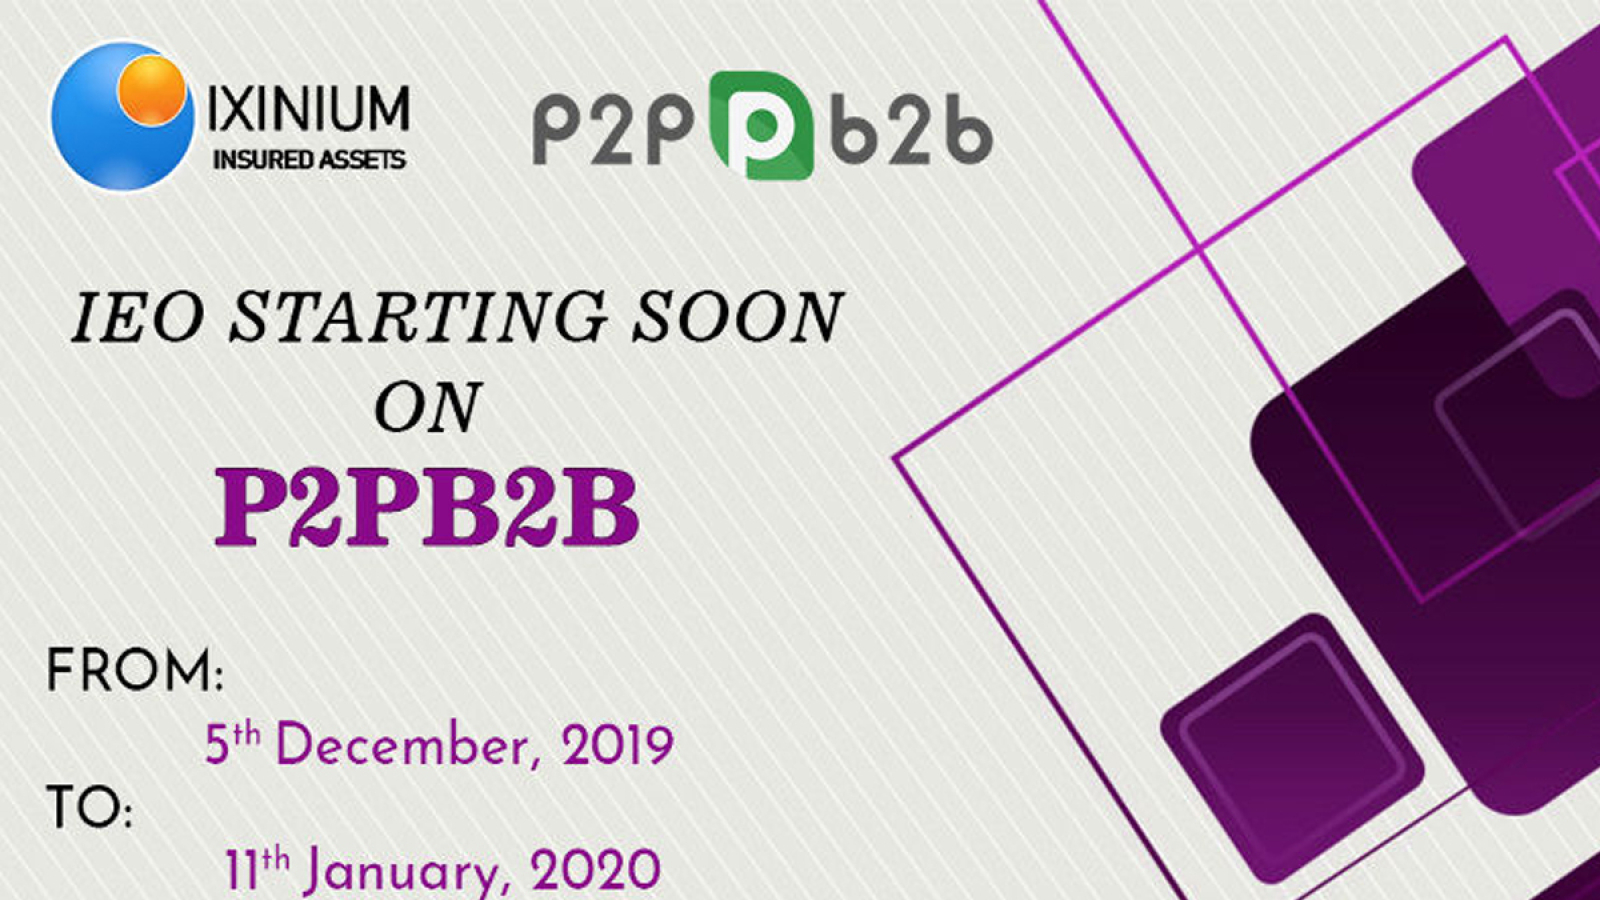 Ixinium to Announce IEO Launching on December 5th on P2PB2B.